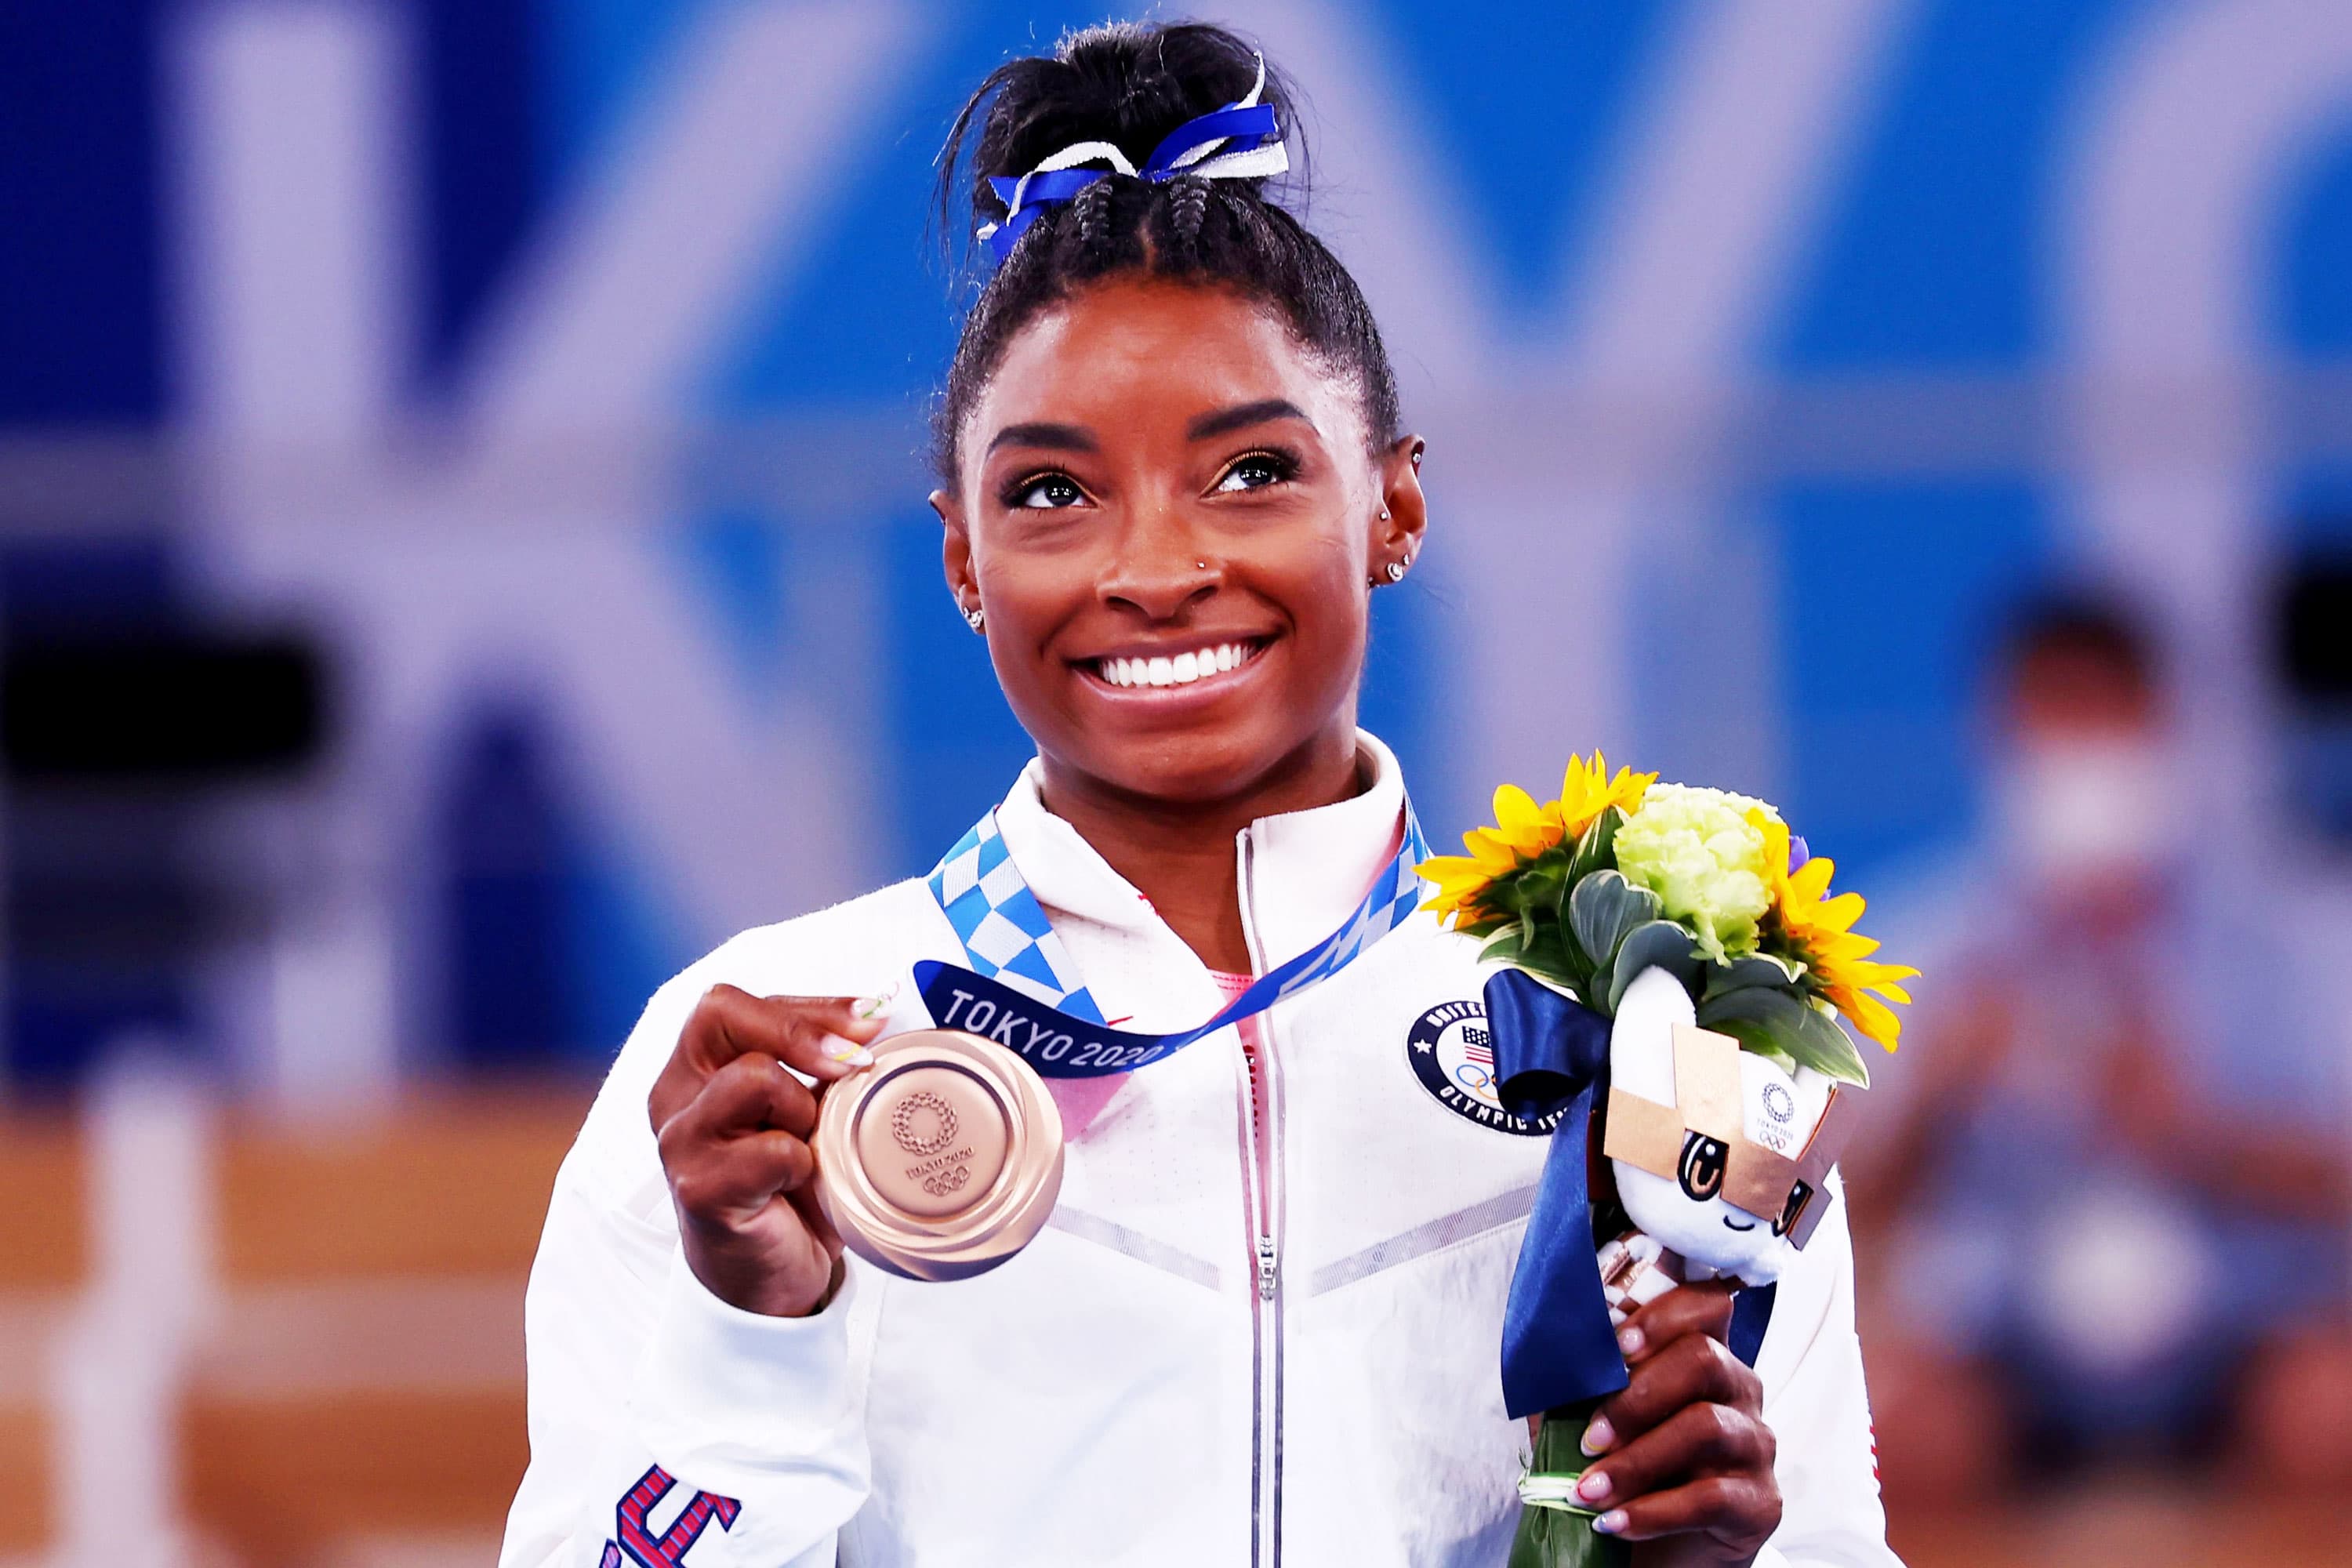 This book helped Simone Biles deal with criticism after the Olympics